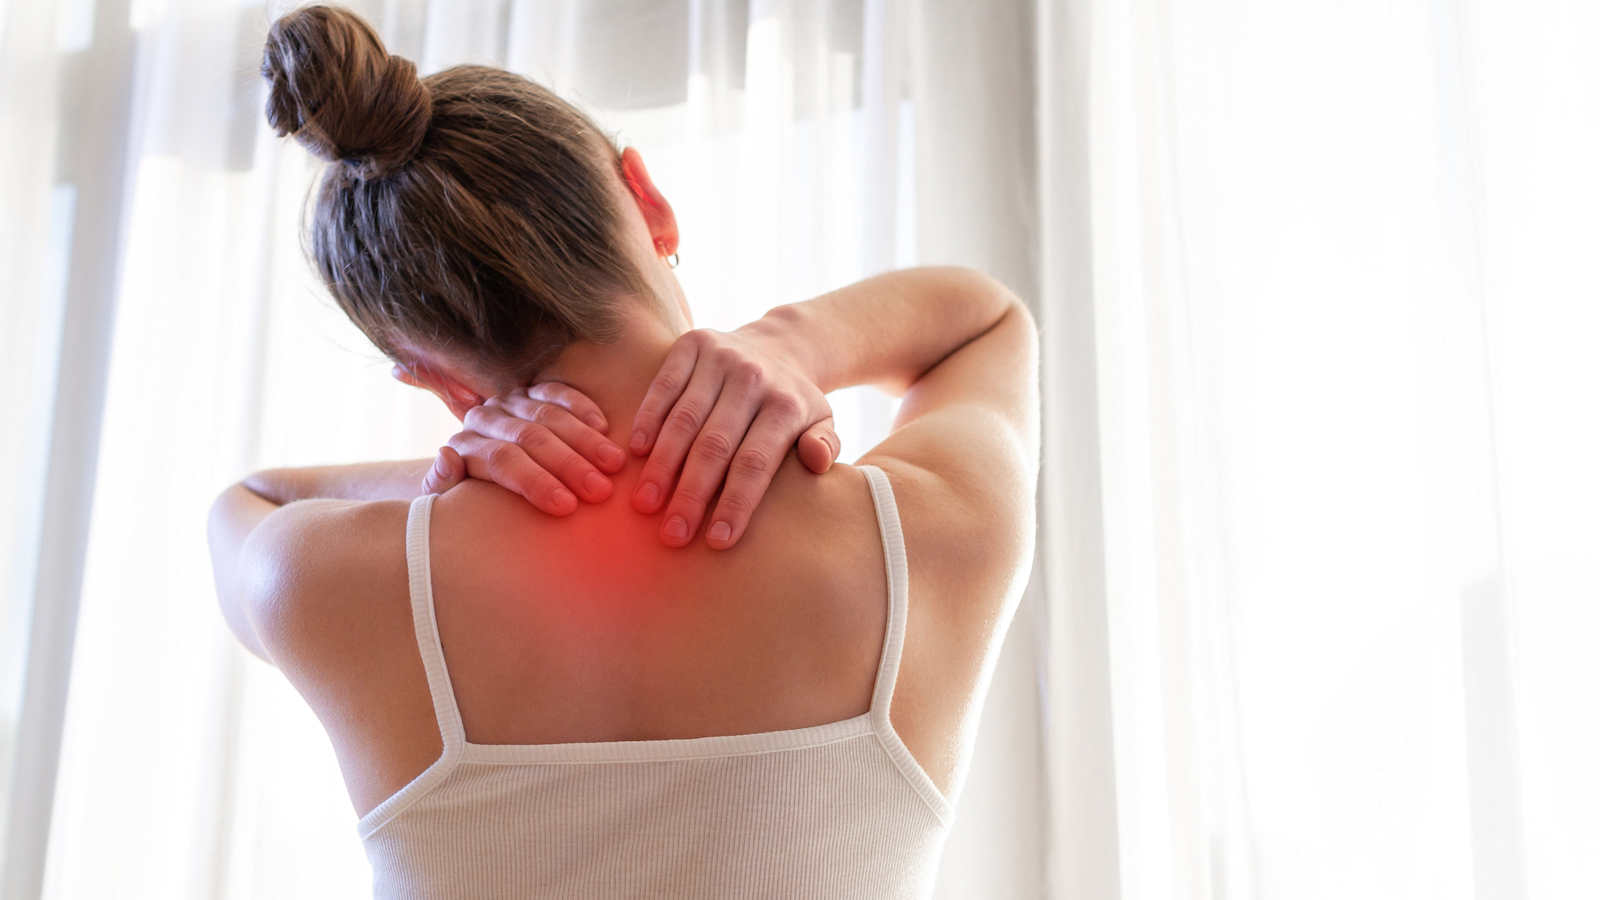 Southwest Spine & Rehab Chiropractic in Mesa